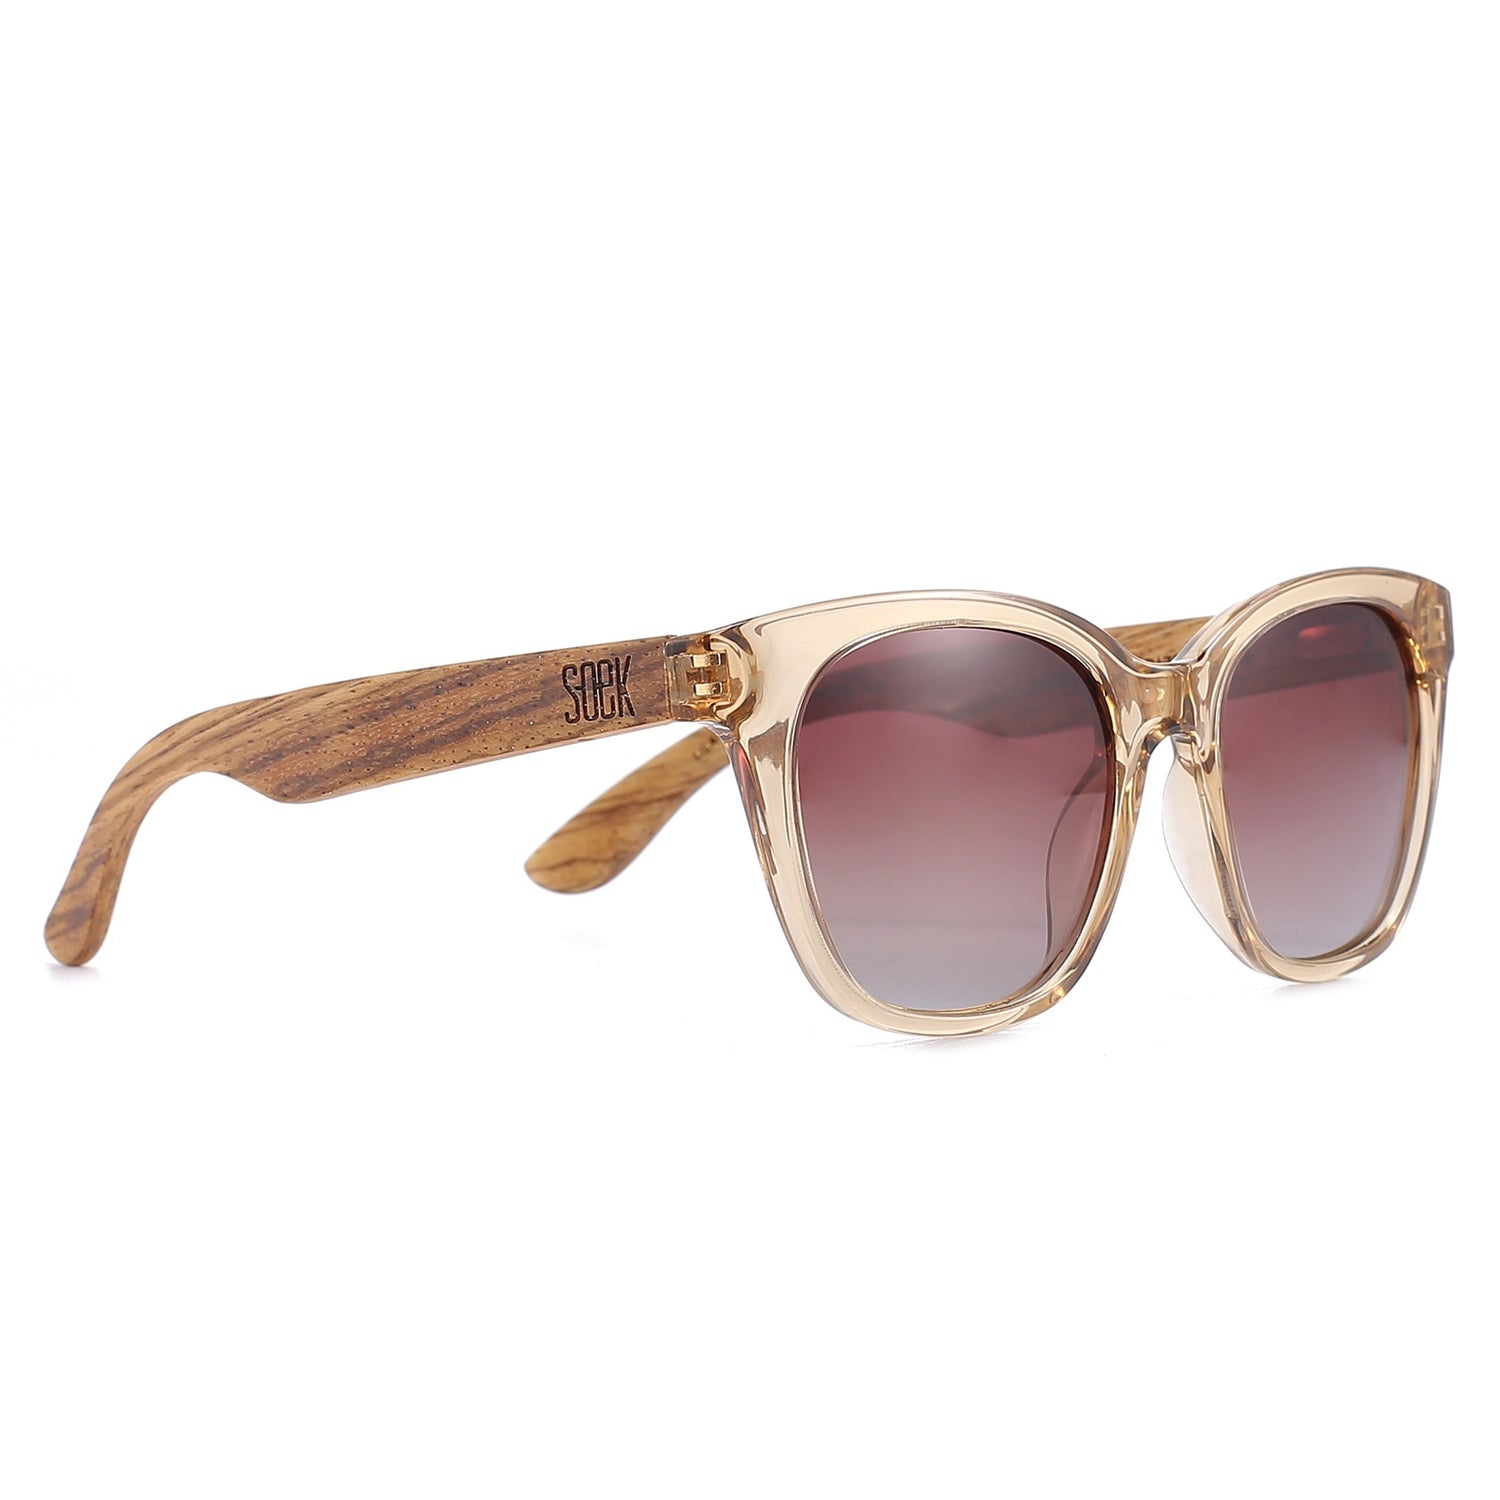 Lila Grace Champagne - Brown Graduated Lens/Walnut Arms